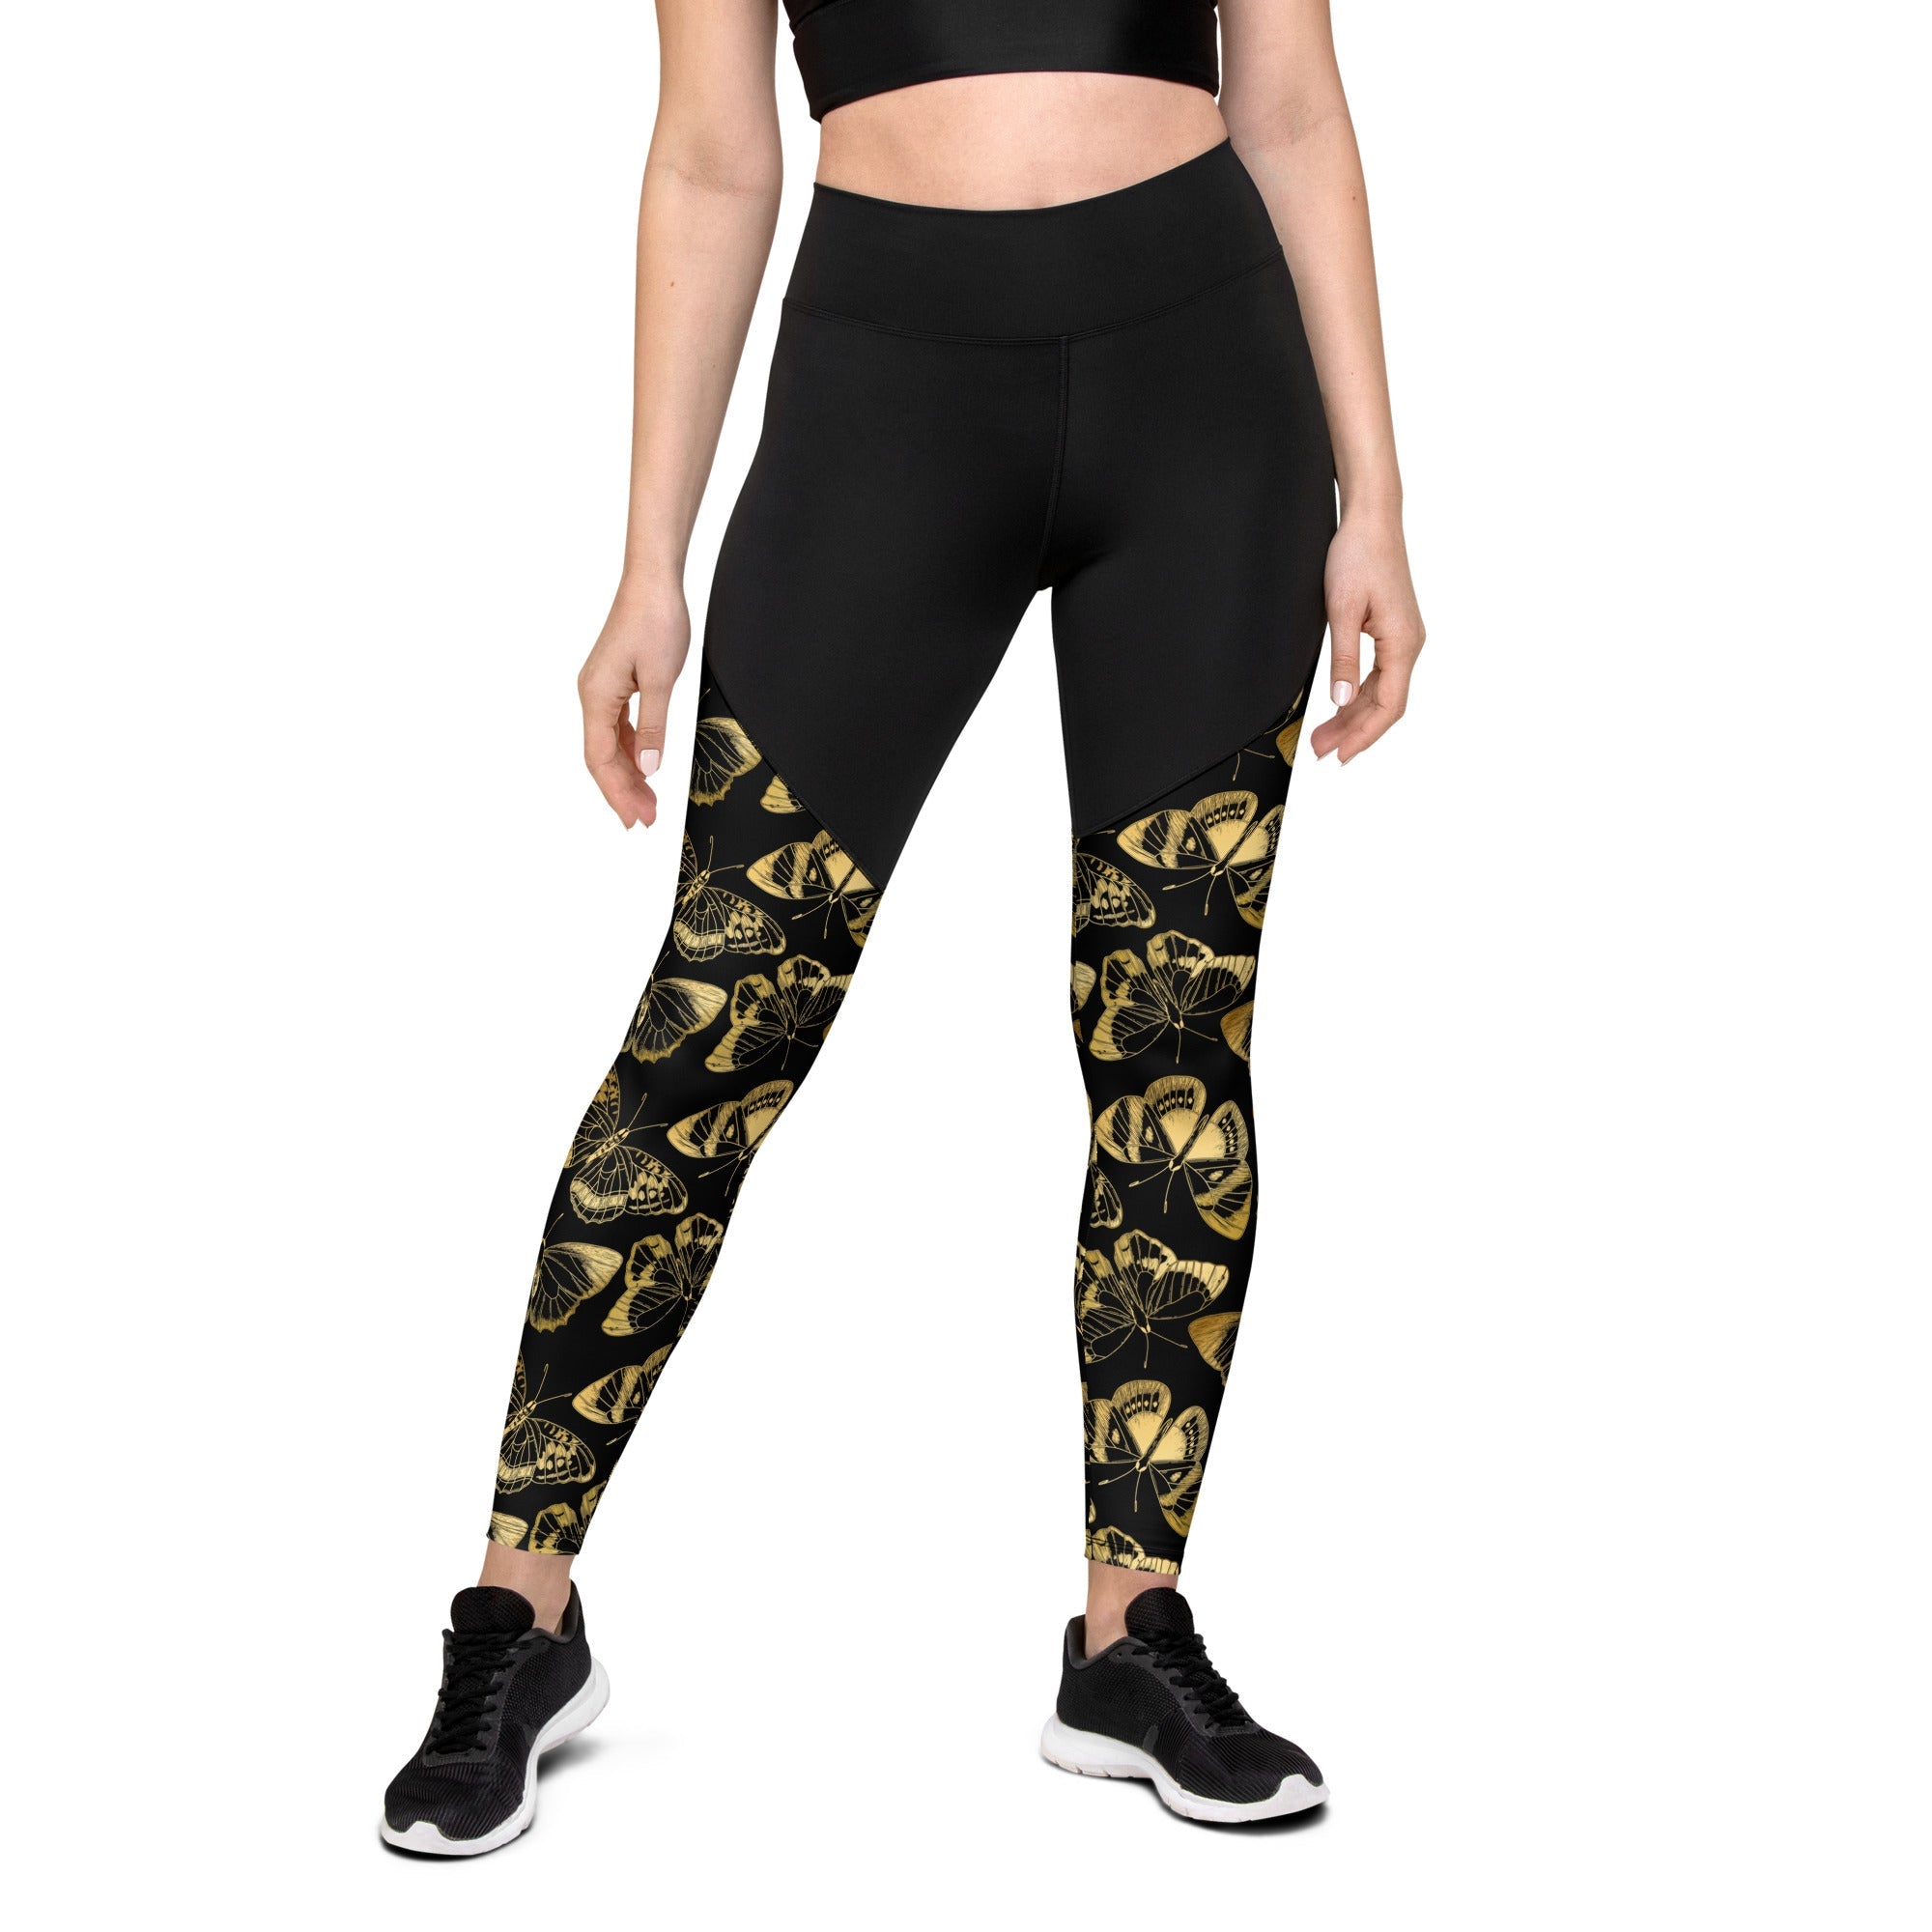 Gold Butterfly Compression Leggings